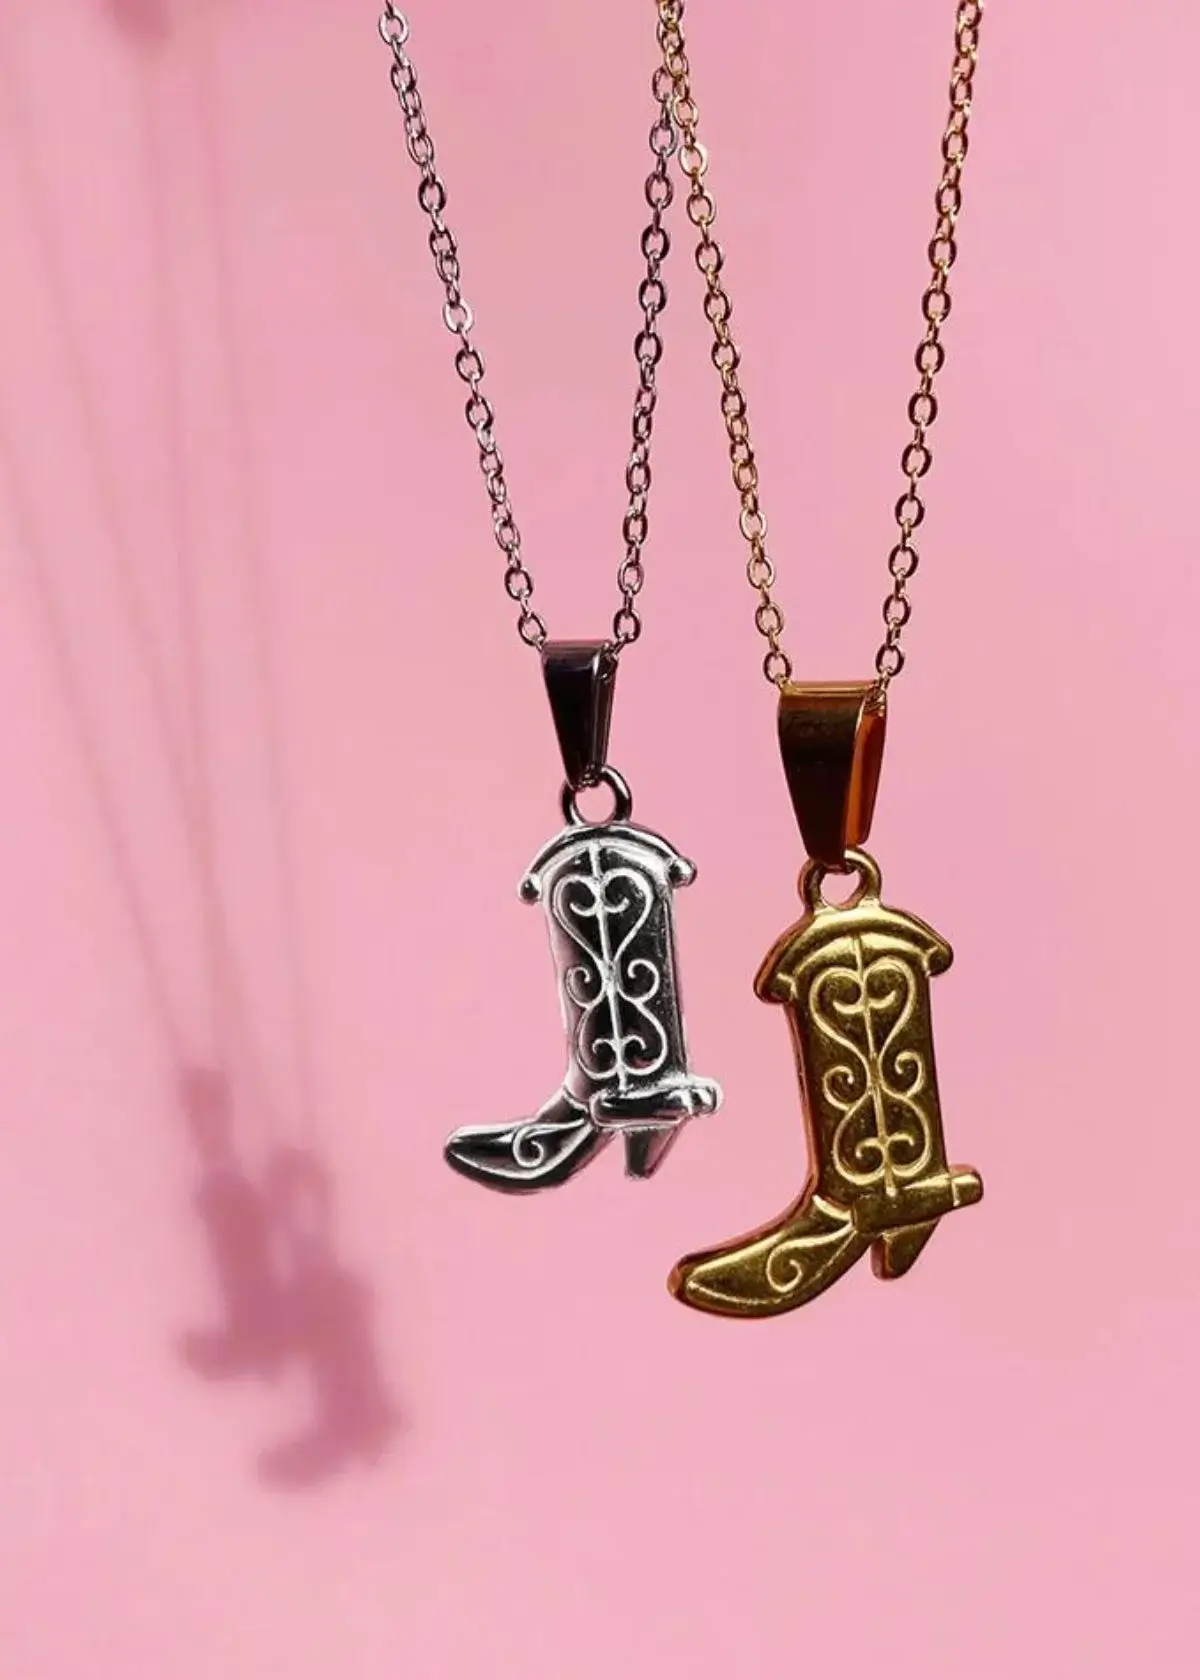 What does a Cowboy Boot Necklace symbolize in a necklace?